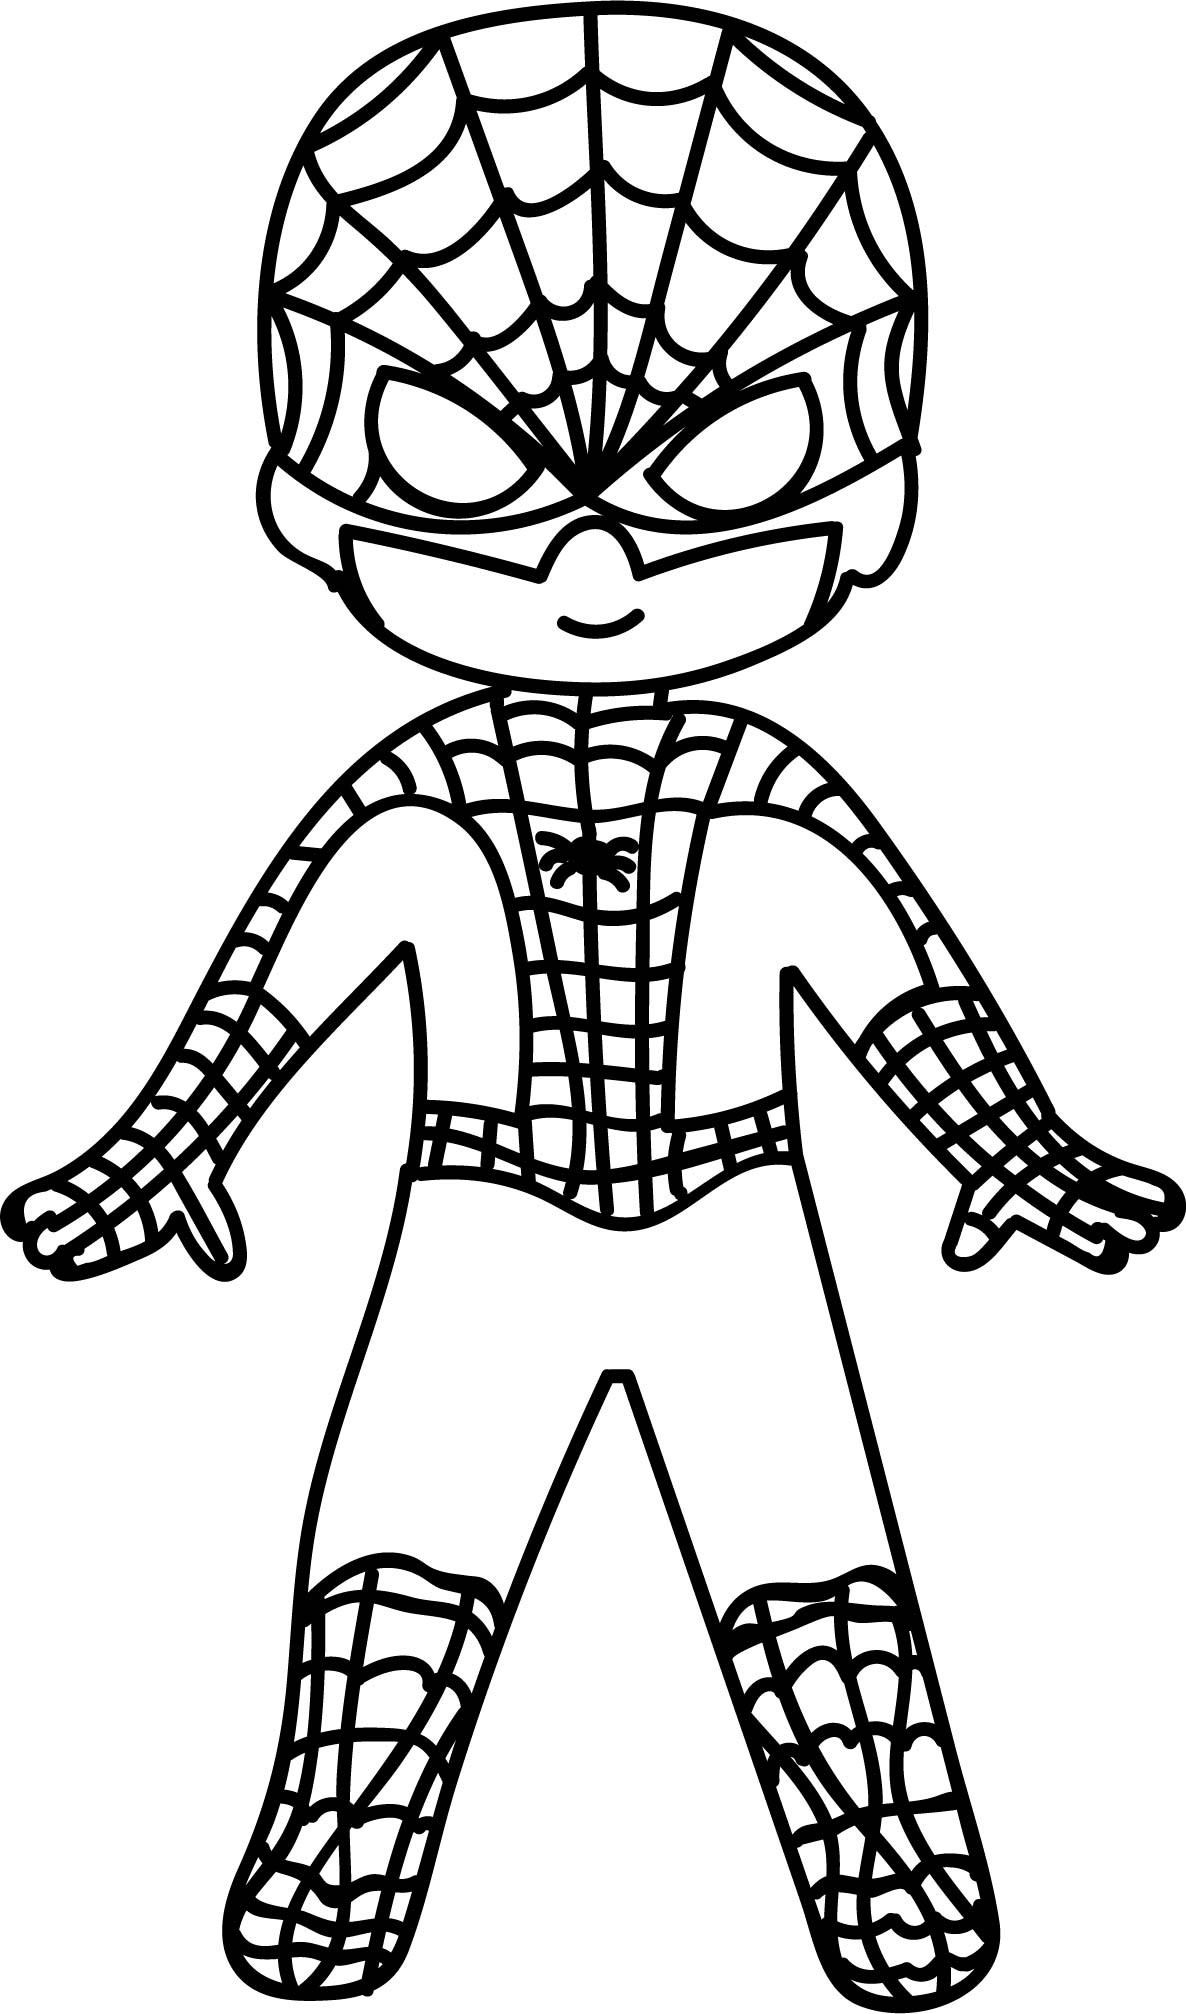 Spiderman Coloring Pages For Kids
 Waiting Cartoon Superhero Spiderman Kid Coloring Page